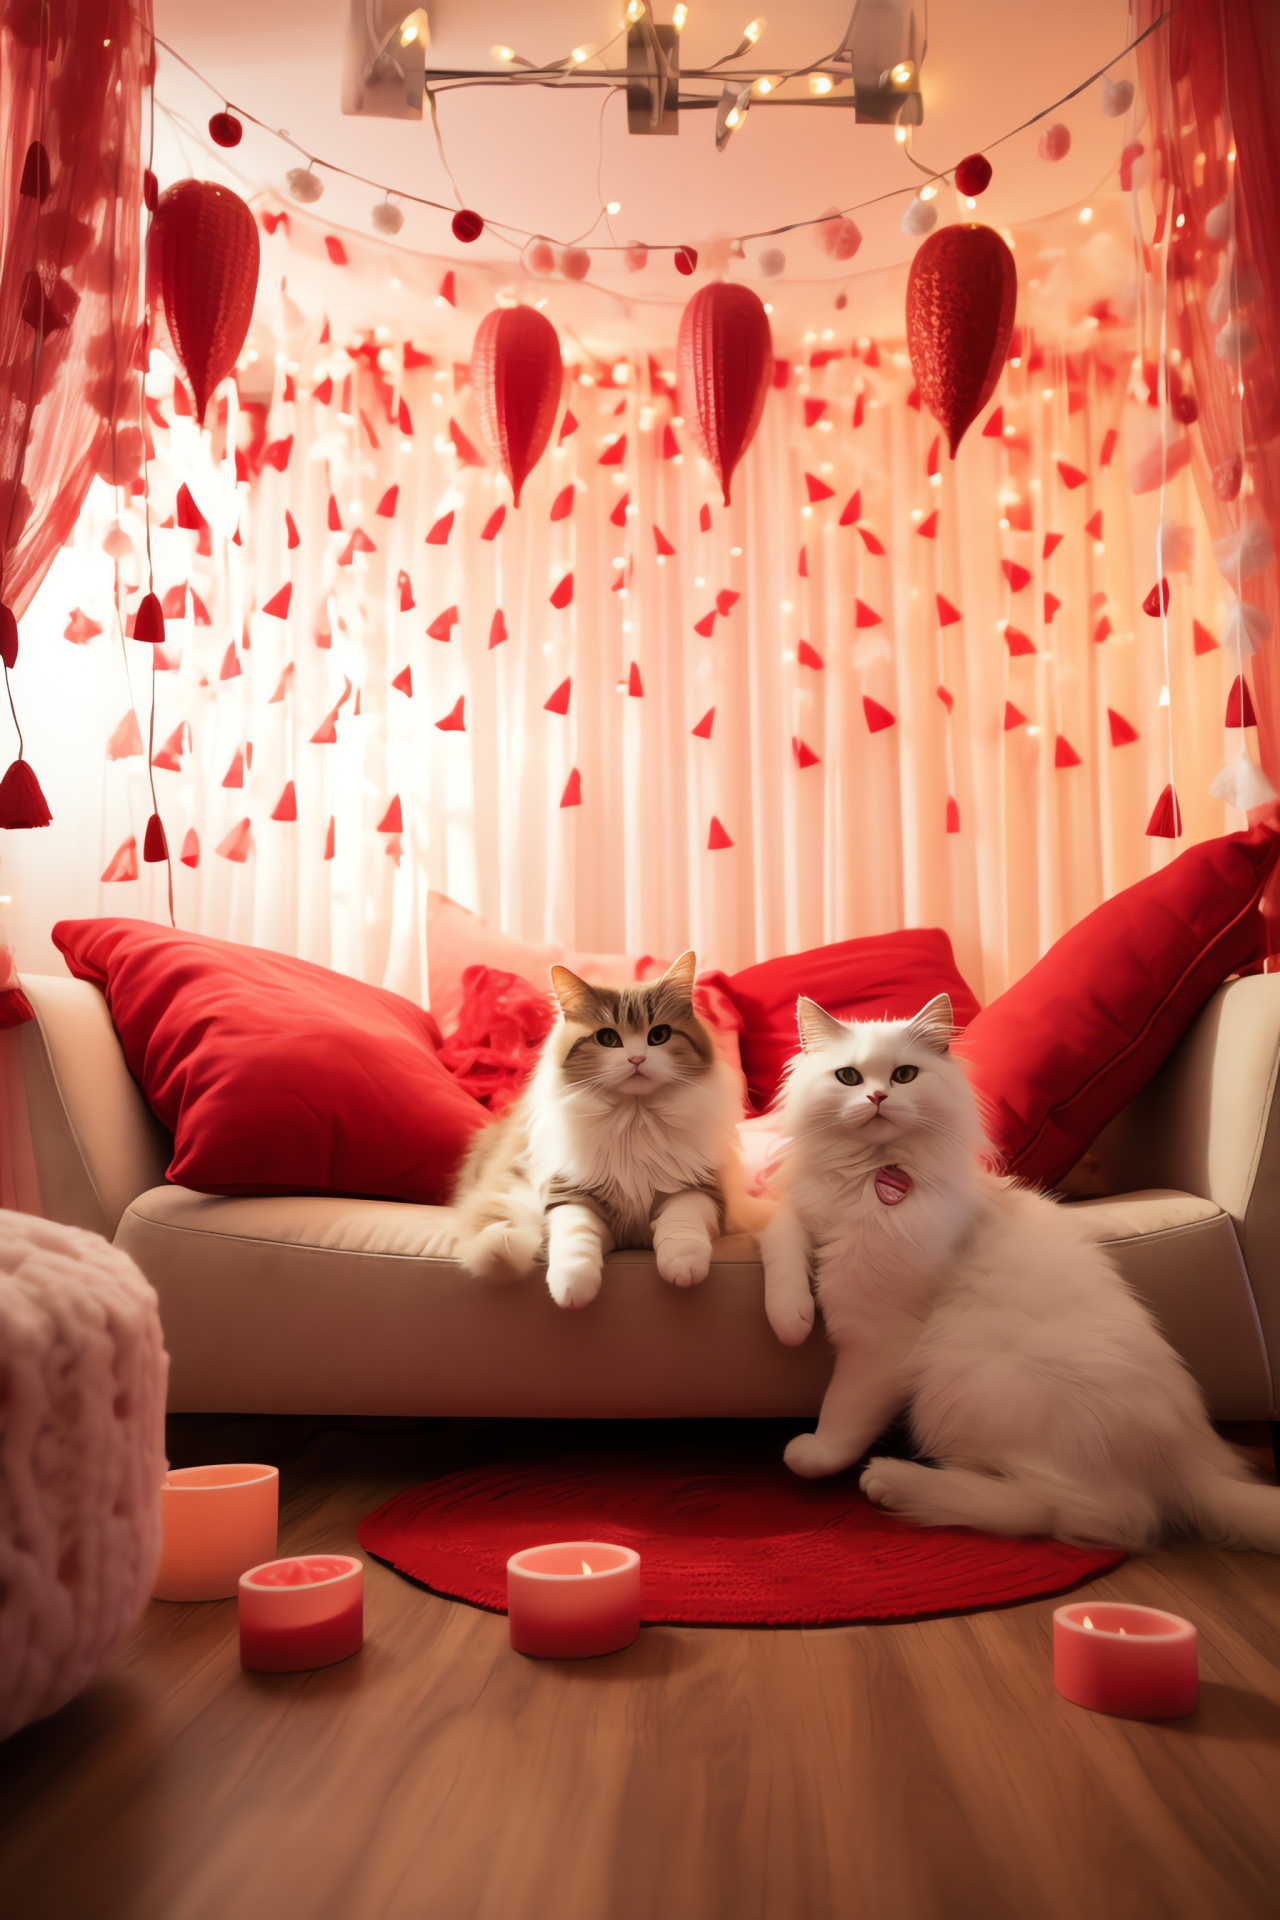 Affectionate felines, Domesticated pets festivity, Woven trimmings, Dramatic drapes, Amorous ambiance, HD Phone Wallpaper